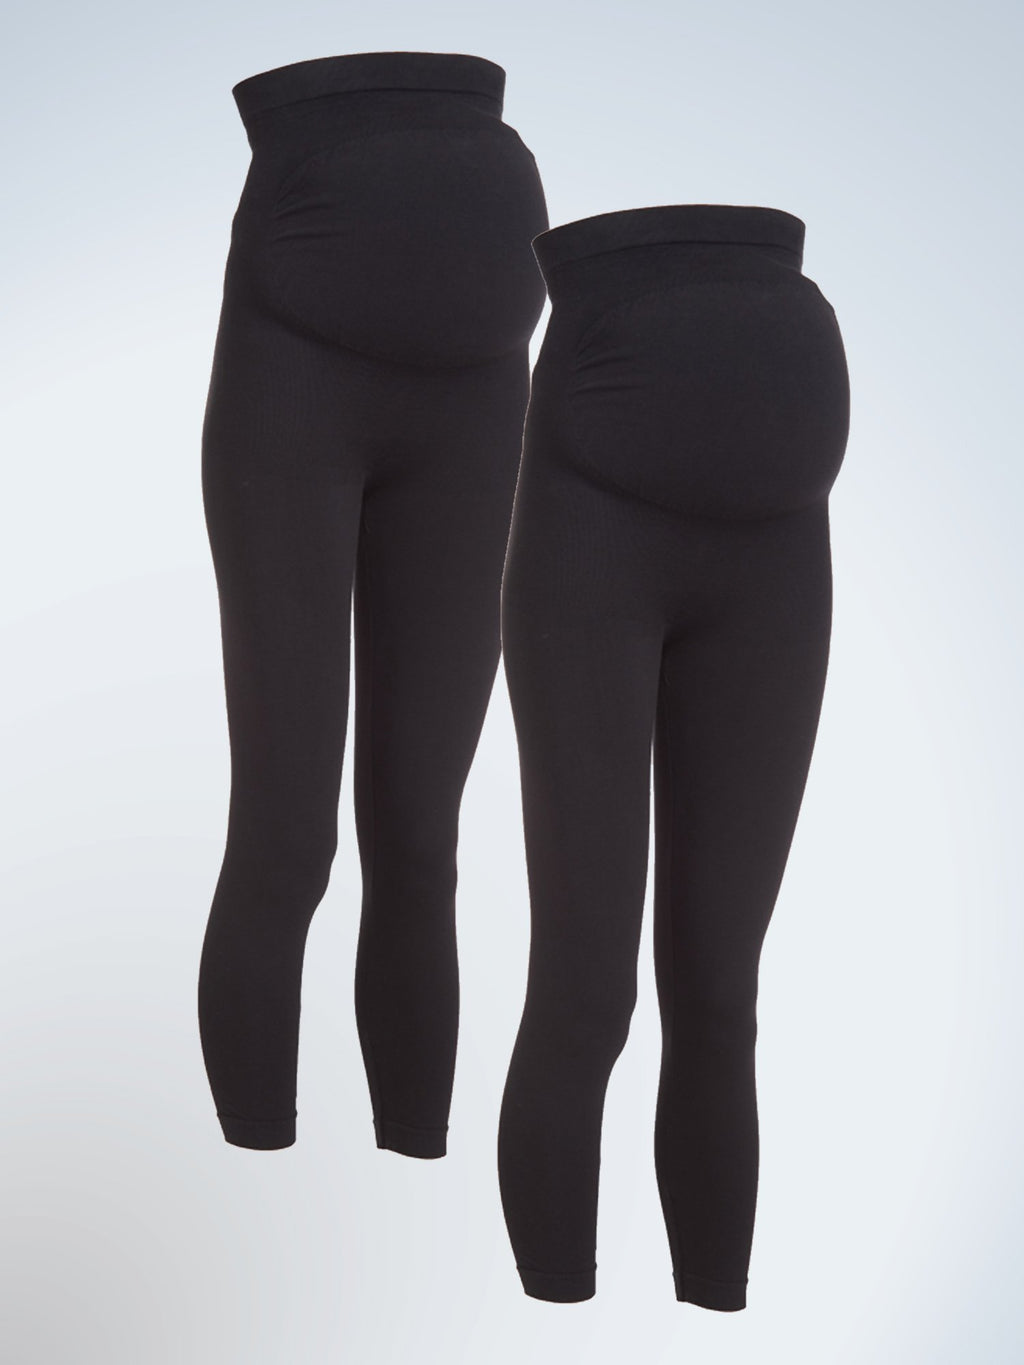 Maternity Support Leggings Patented Back Support 2-Pack – Leading